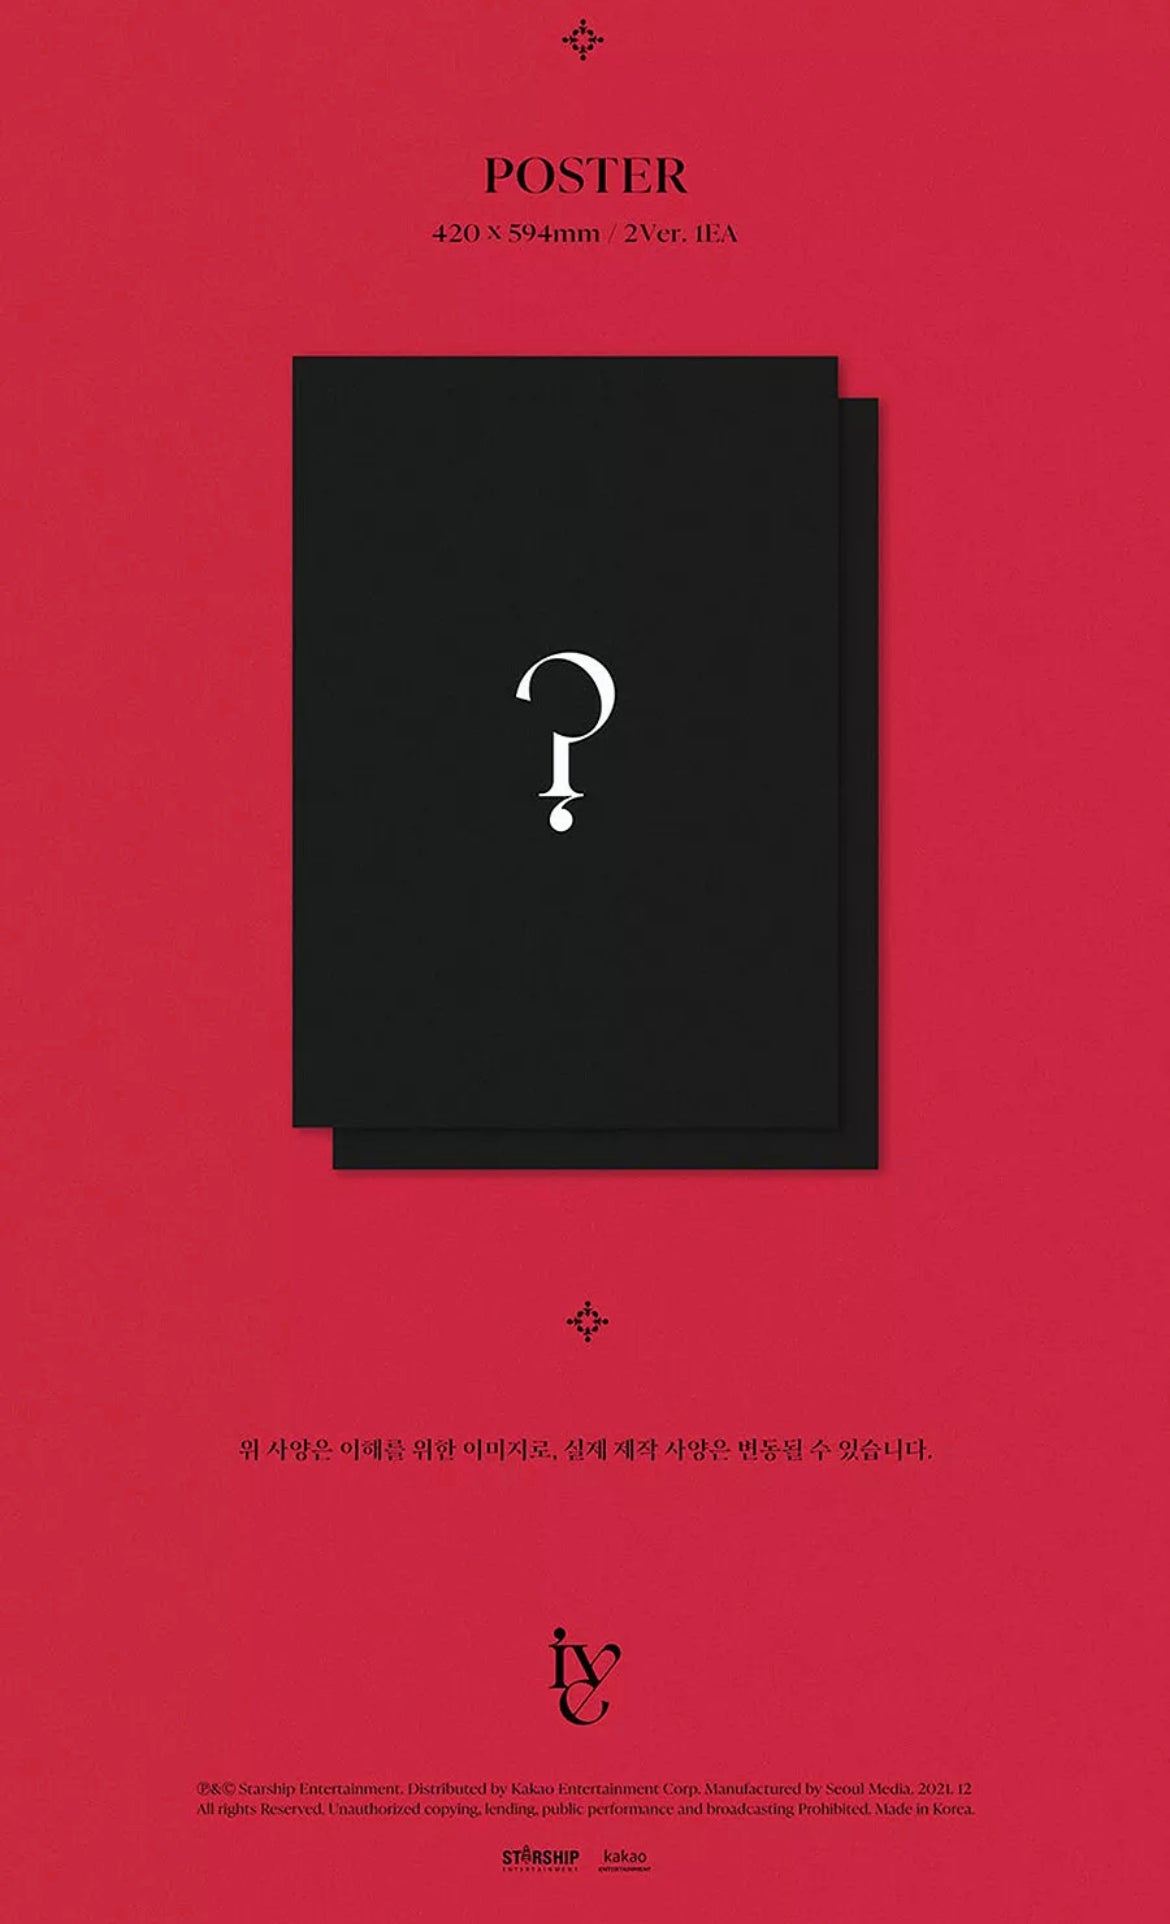 IVE [ELEVEN] 1st Single Album CD+POSTER+Photo Book+Photo Card+Fold Poster SEALED